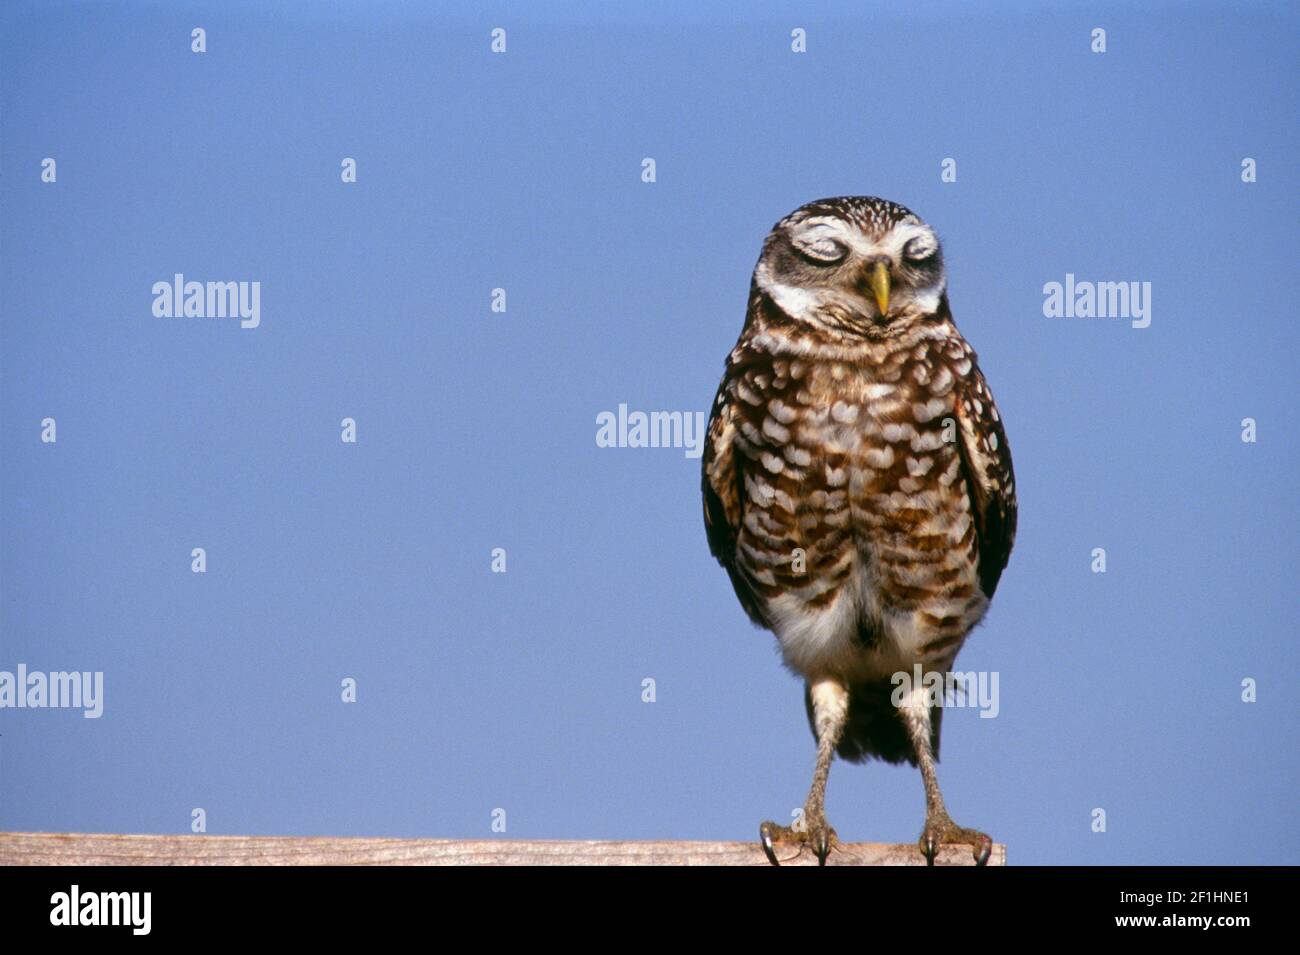 Meditating or hiding? Burrowing owl, Athene cunicularia, standing with eyes closed, Florida, USA Stock Photo